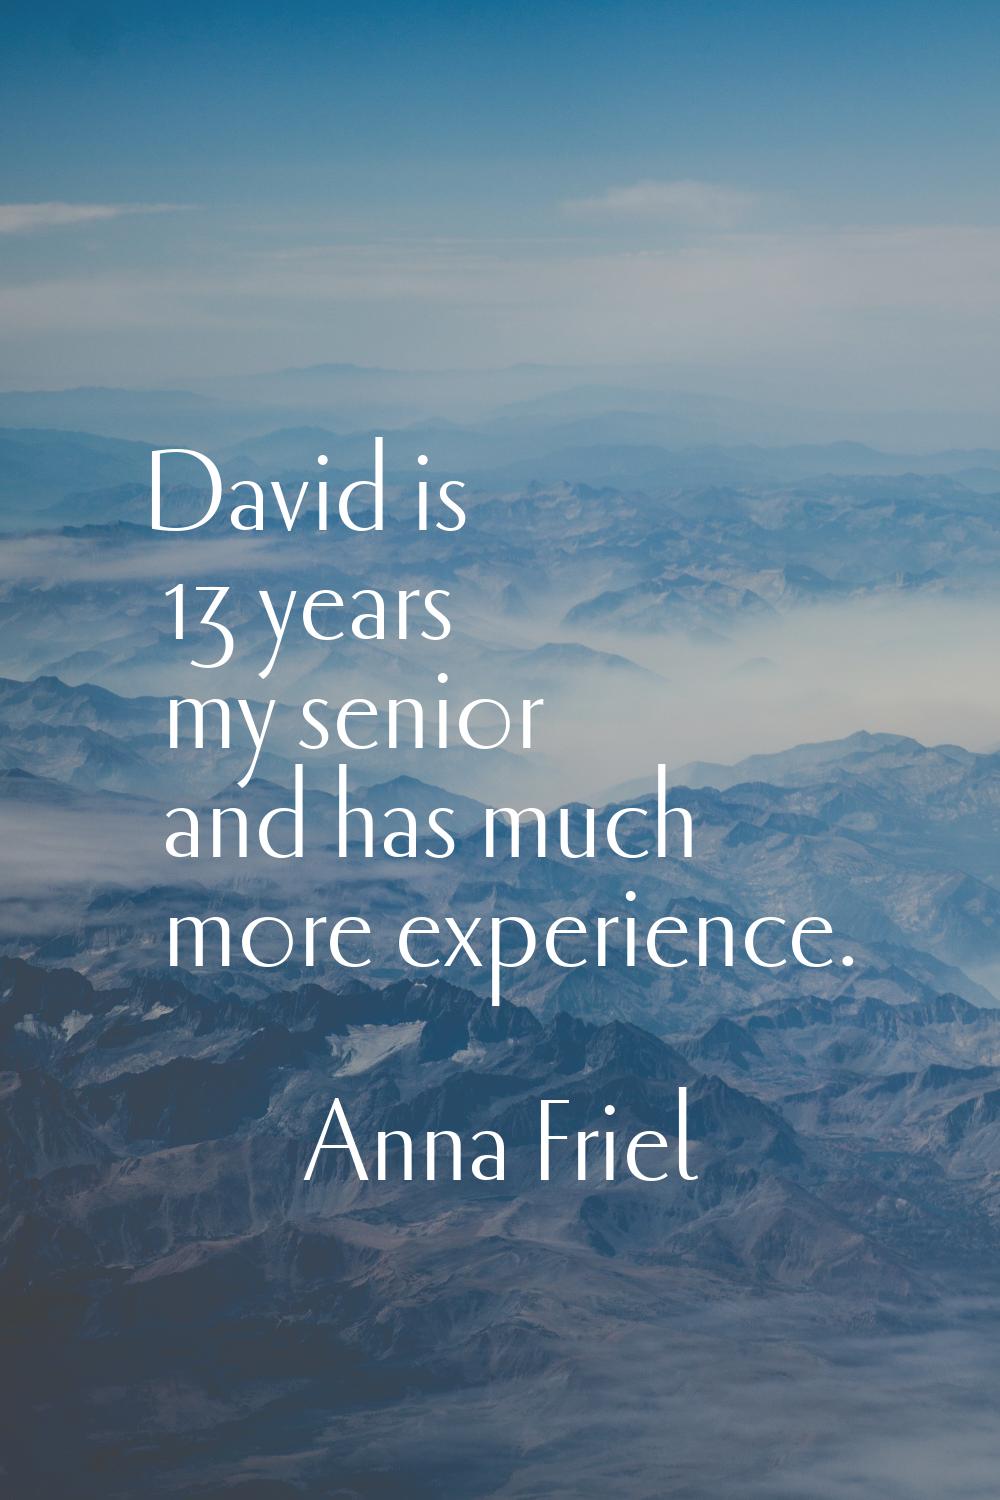 David is 13 years my senior and has much more experience.